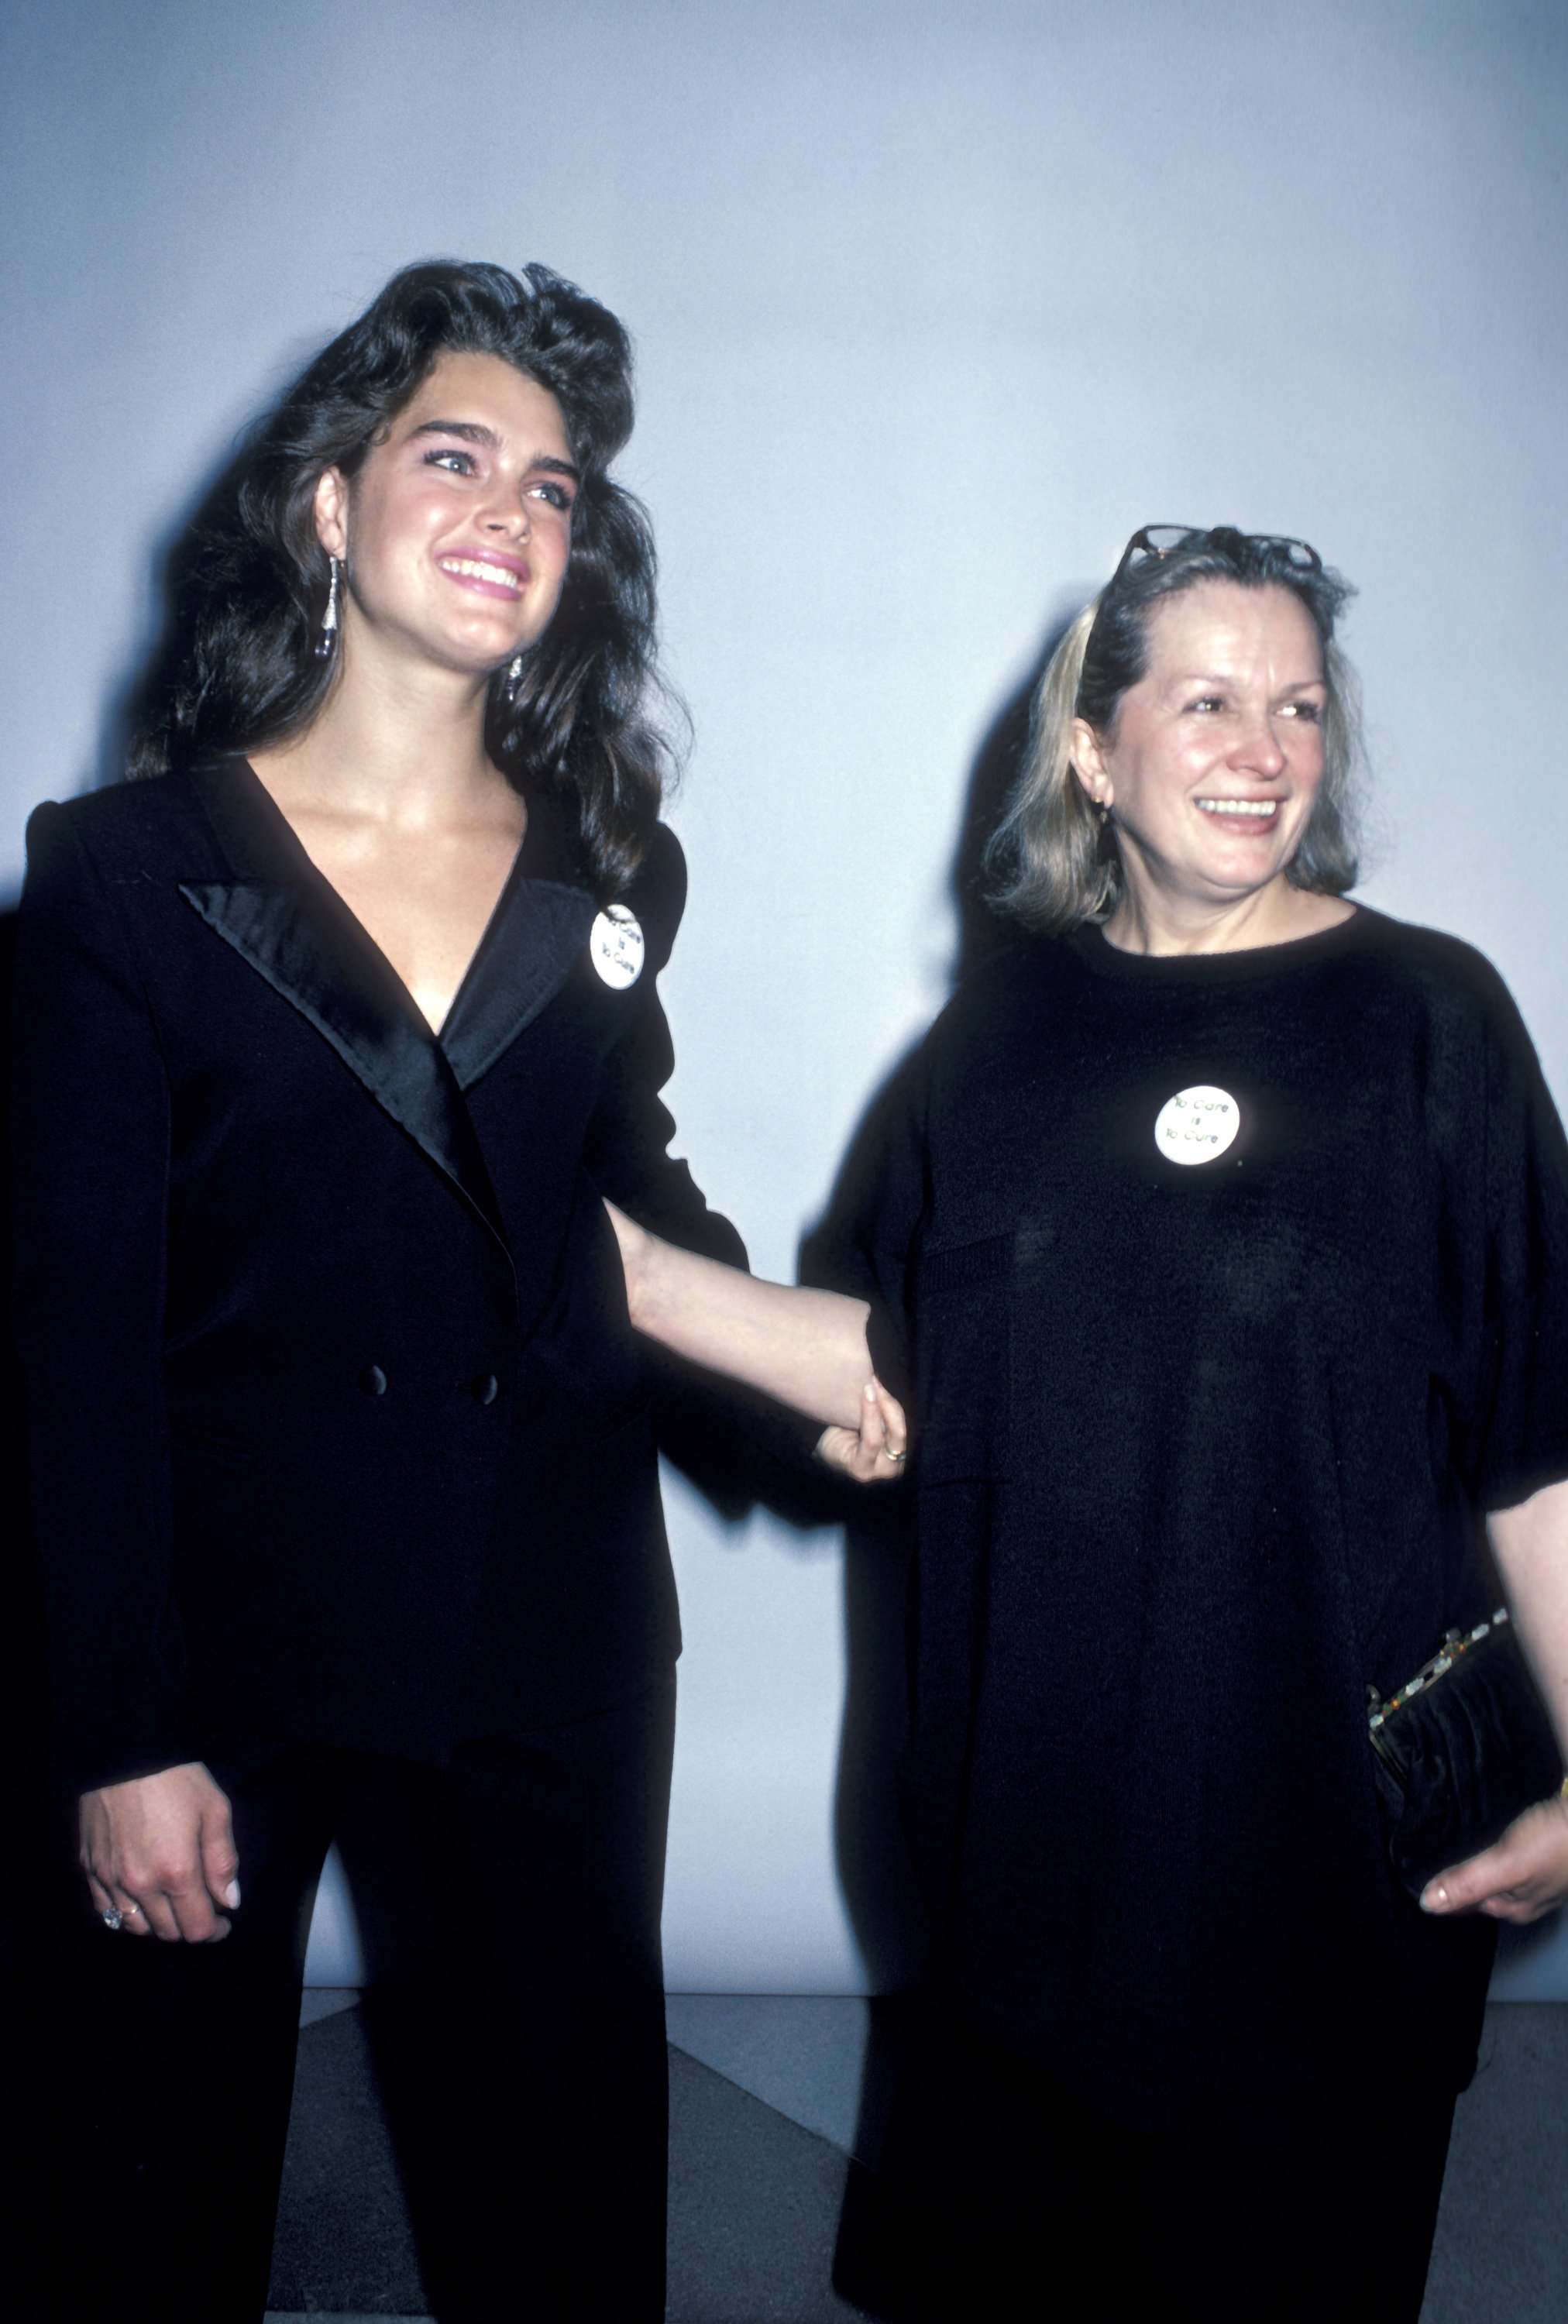  Brooke Shields and her mother Teri Shields attend a photo session for the American Foundation For AIDS Research at Jacob Javits Convention Center on April 29, 1986, in New York City, New York. | Source: Getty Images